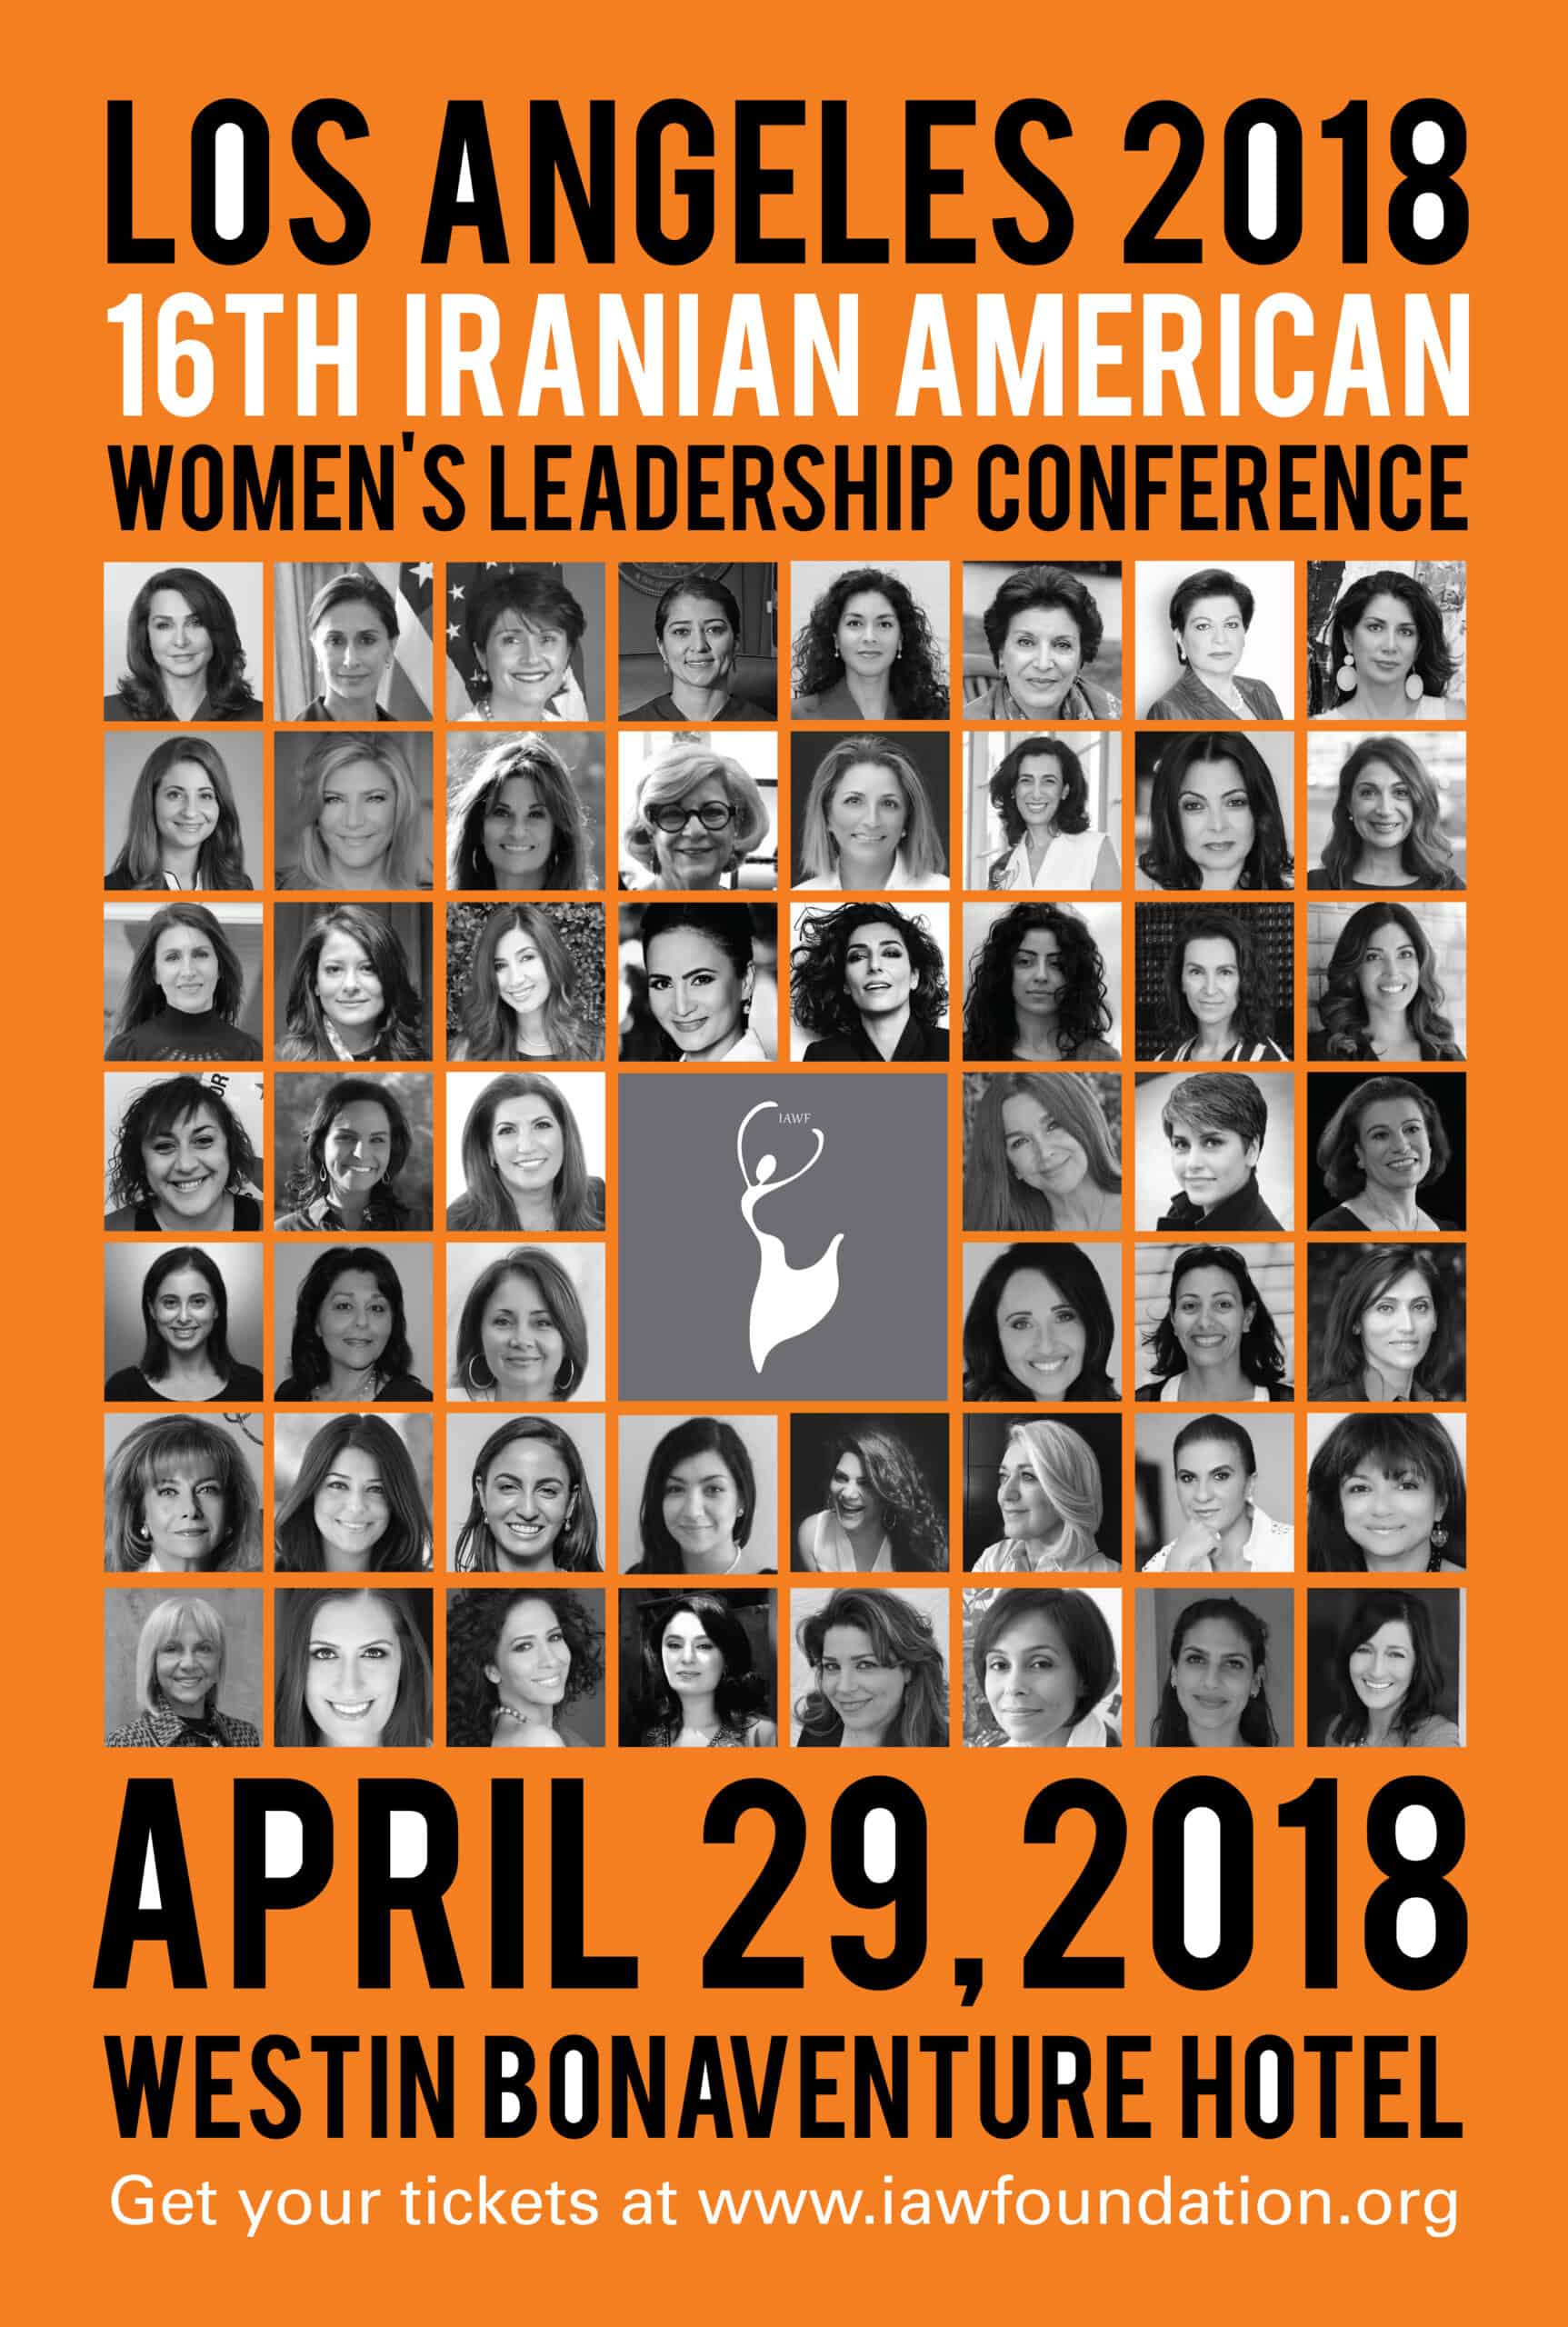 Iranian American Women's Leadership Conference in Los Angeles 2018